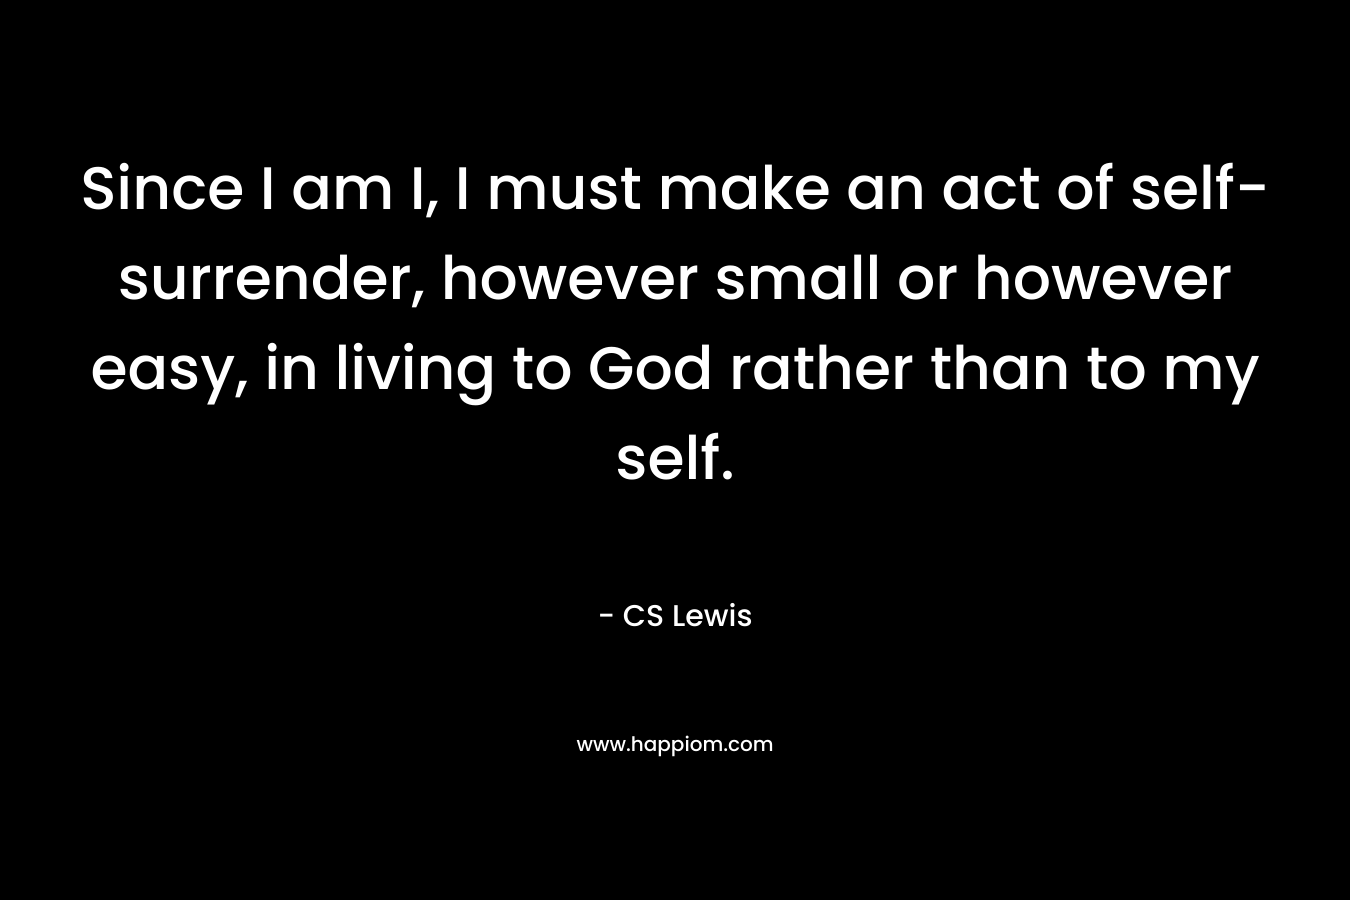 Since I am I, I must make an act of self-surrender, however small or however easy, in living to God rather than to my self.